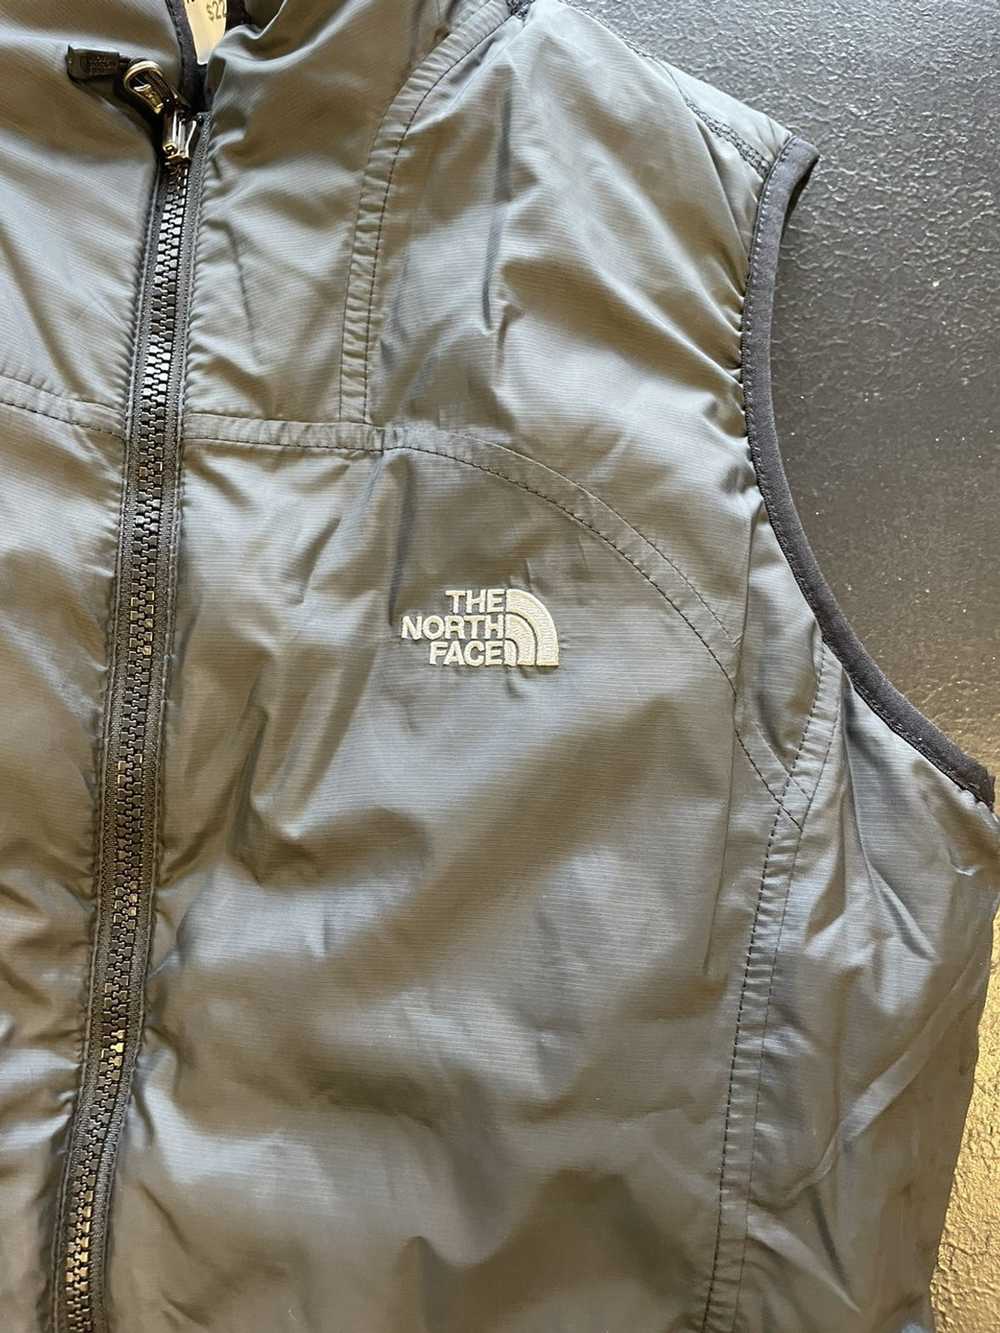 The North Face Reversible North Face Vest - image 2